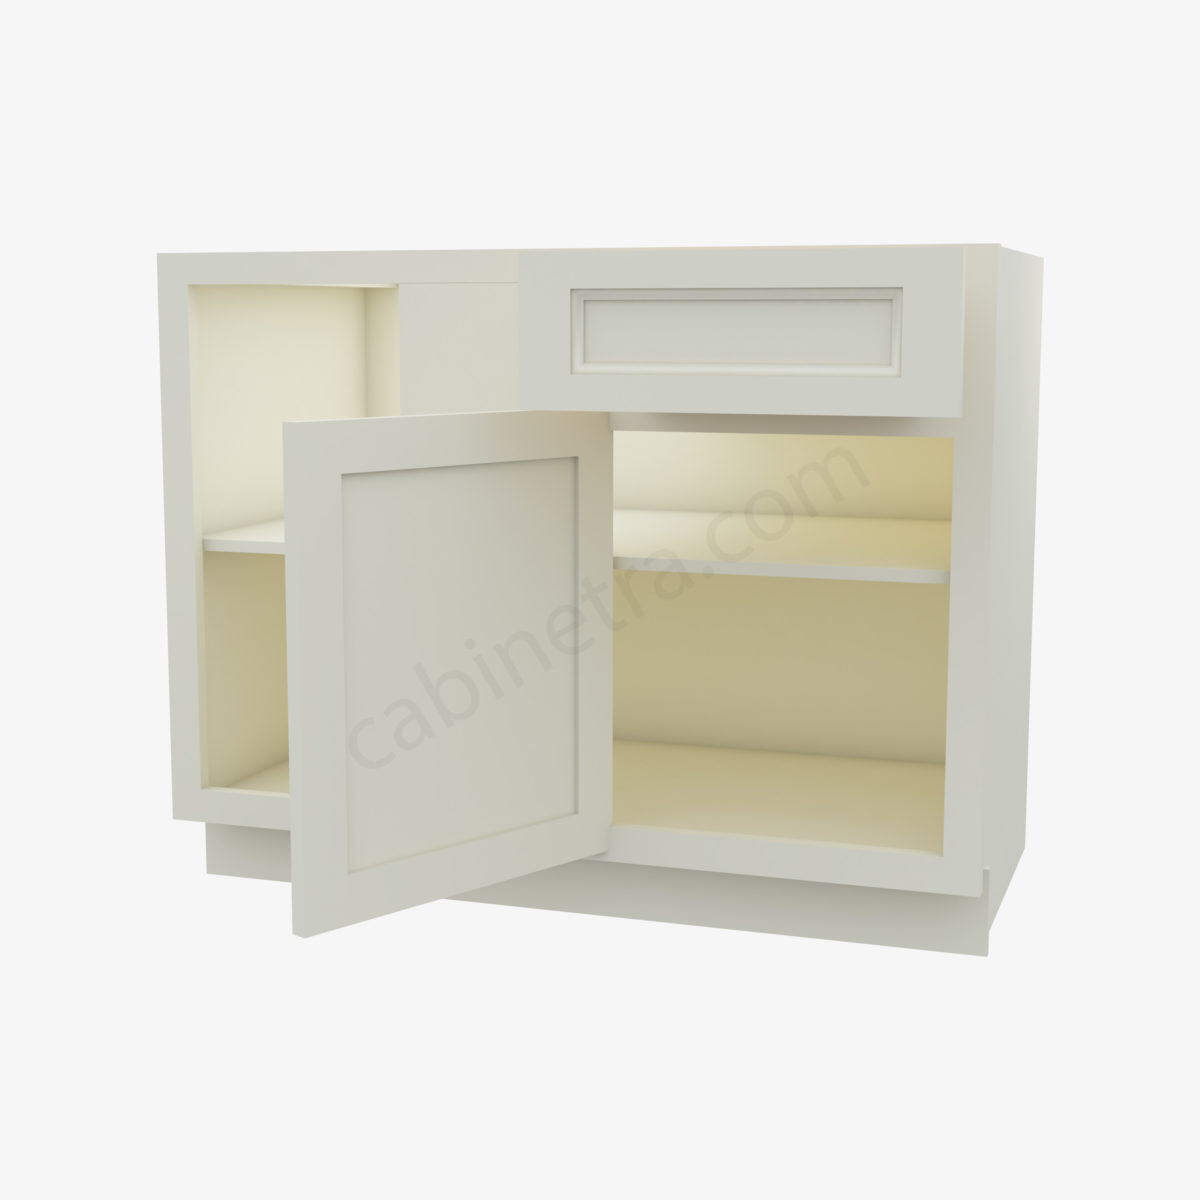 TQ BBLC45 48 42W 5 Forevermark Townplace Crema Cabinetra scaled